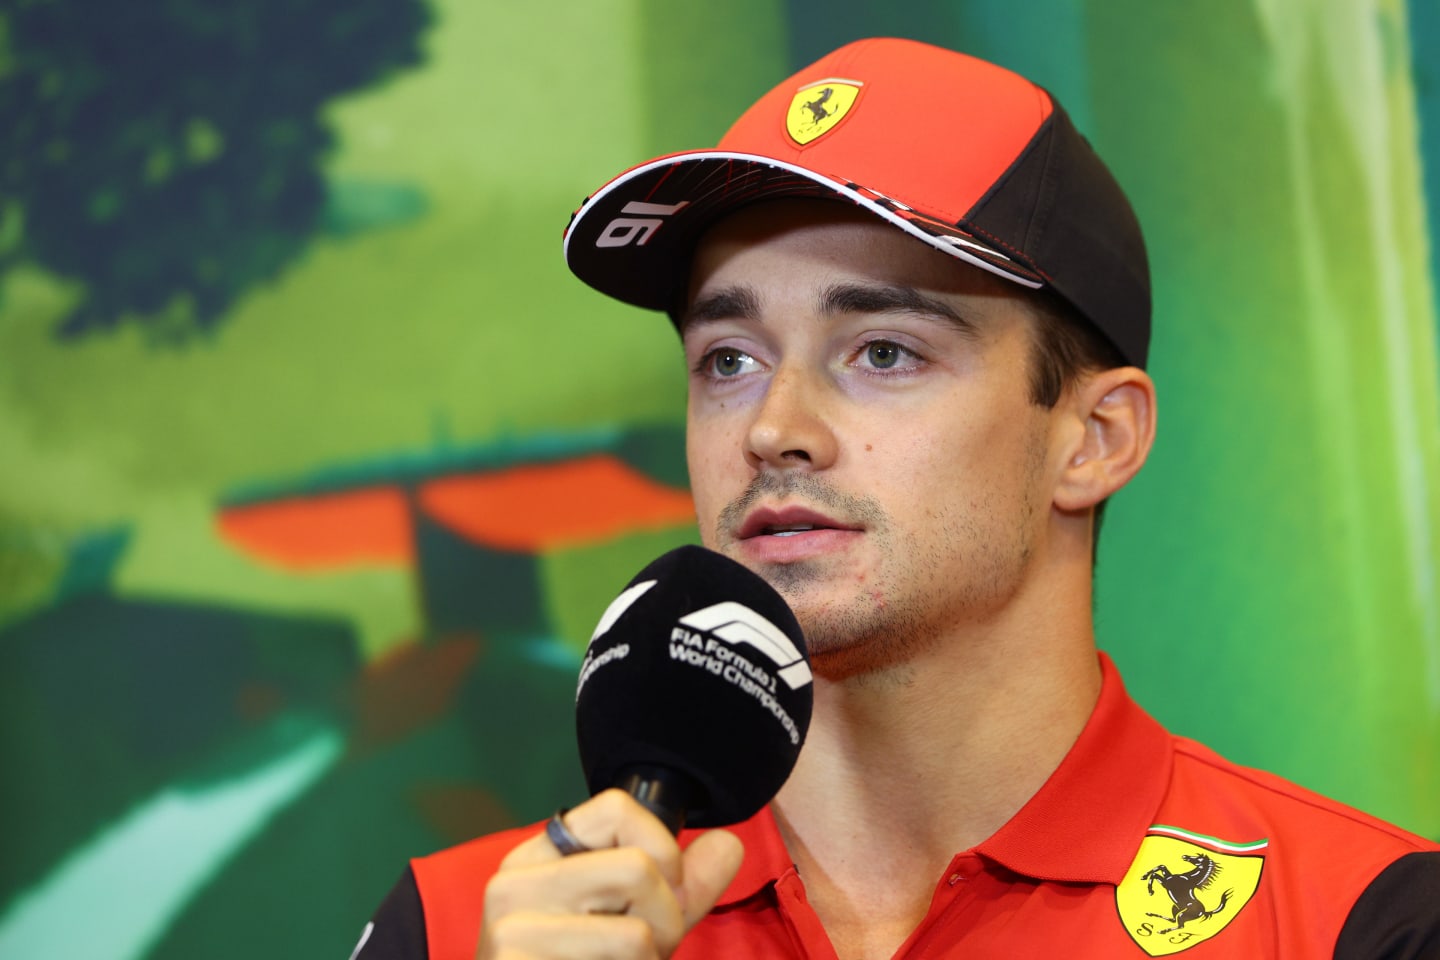 BAKU, AZERBAIJAN - JUNE 10: Charles Leclerc of Monaco and Ferrari talks in the Drivers Press Conference prior to practice ahead of the F1 Grand Prix of Azerbaijan at Baku City Circuit on June 10, 2022 in Baku, Azerbaijan. (Photo by Clive Rose/Getty Images)